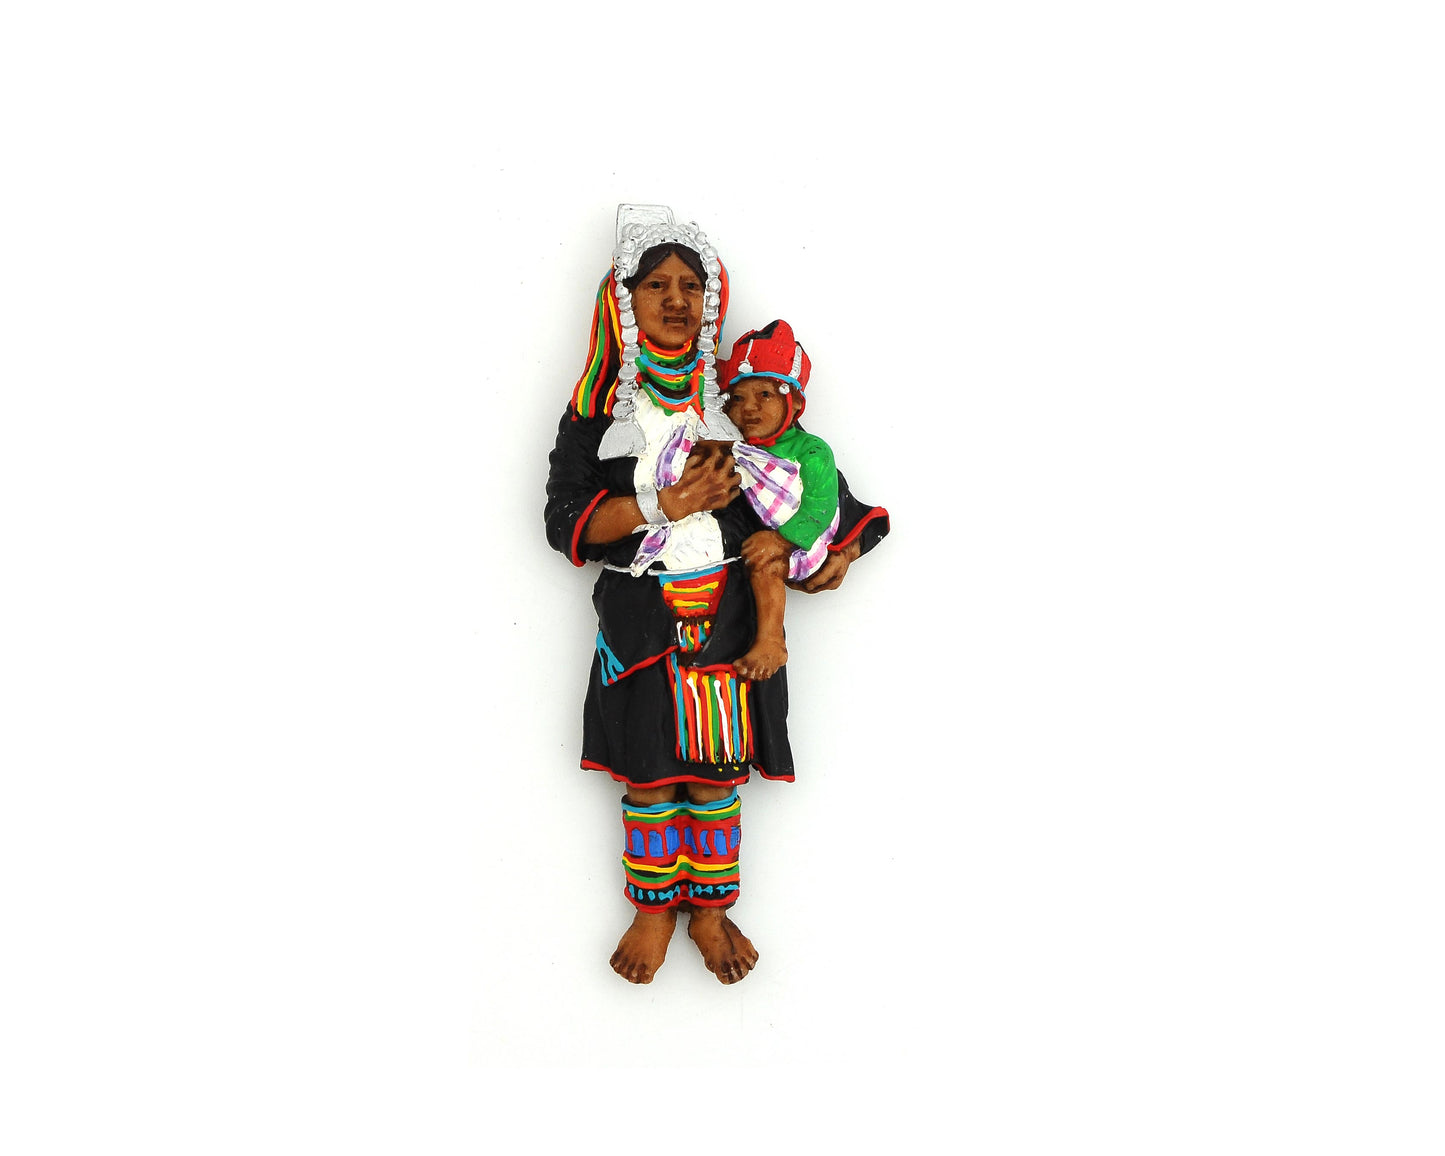 [𝐌𝐞𝐚𝐧𝐢𝐧𝐠𝐟𝐮𝐥 𝐠𝐢𝐟𝐭𝐬] Myanmar Refrigerator Magnets Shaped Like Traditional Ethnic Activities